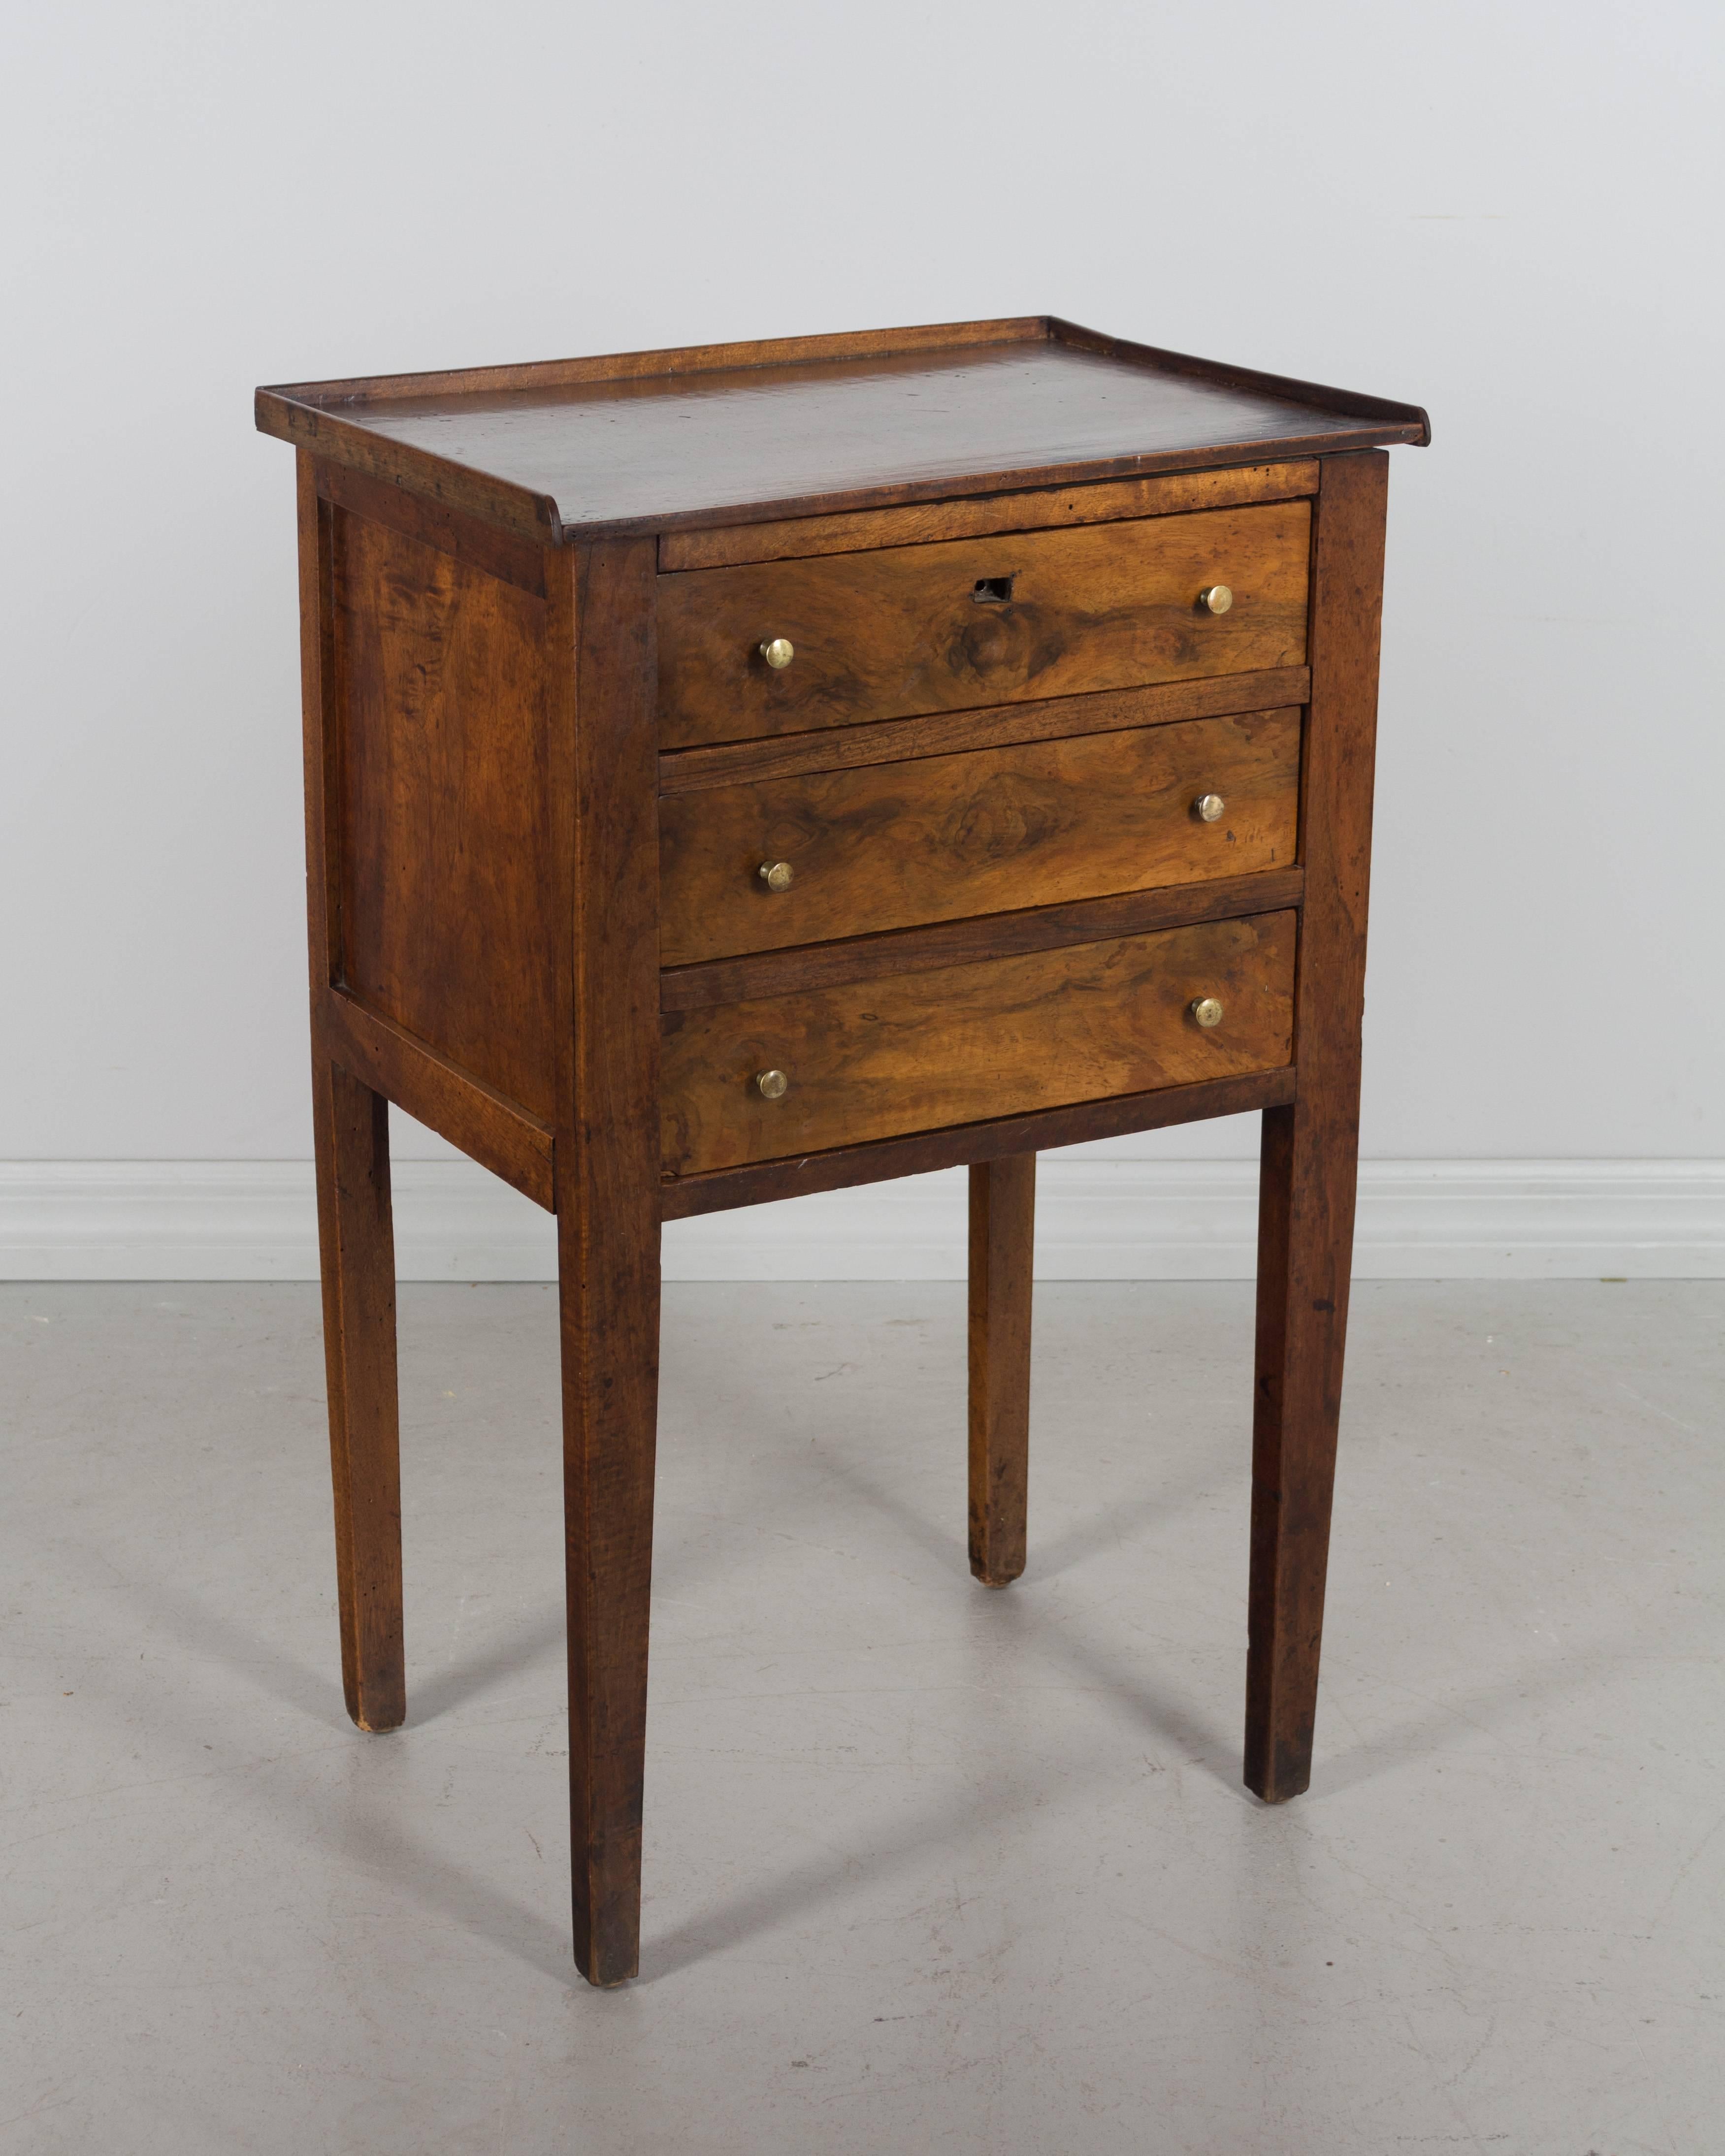 19th century French Directoire side table with three dovetailed drawers. Made of solid walnut and finished on all sides. Pine as a secondary wood. Lock is present but there is no key. The escutcheon is missing on the top drawer.